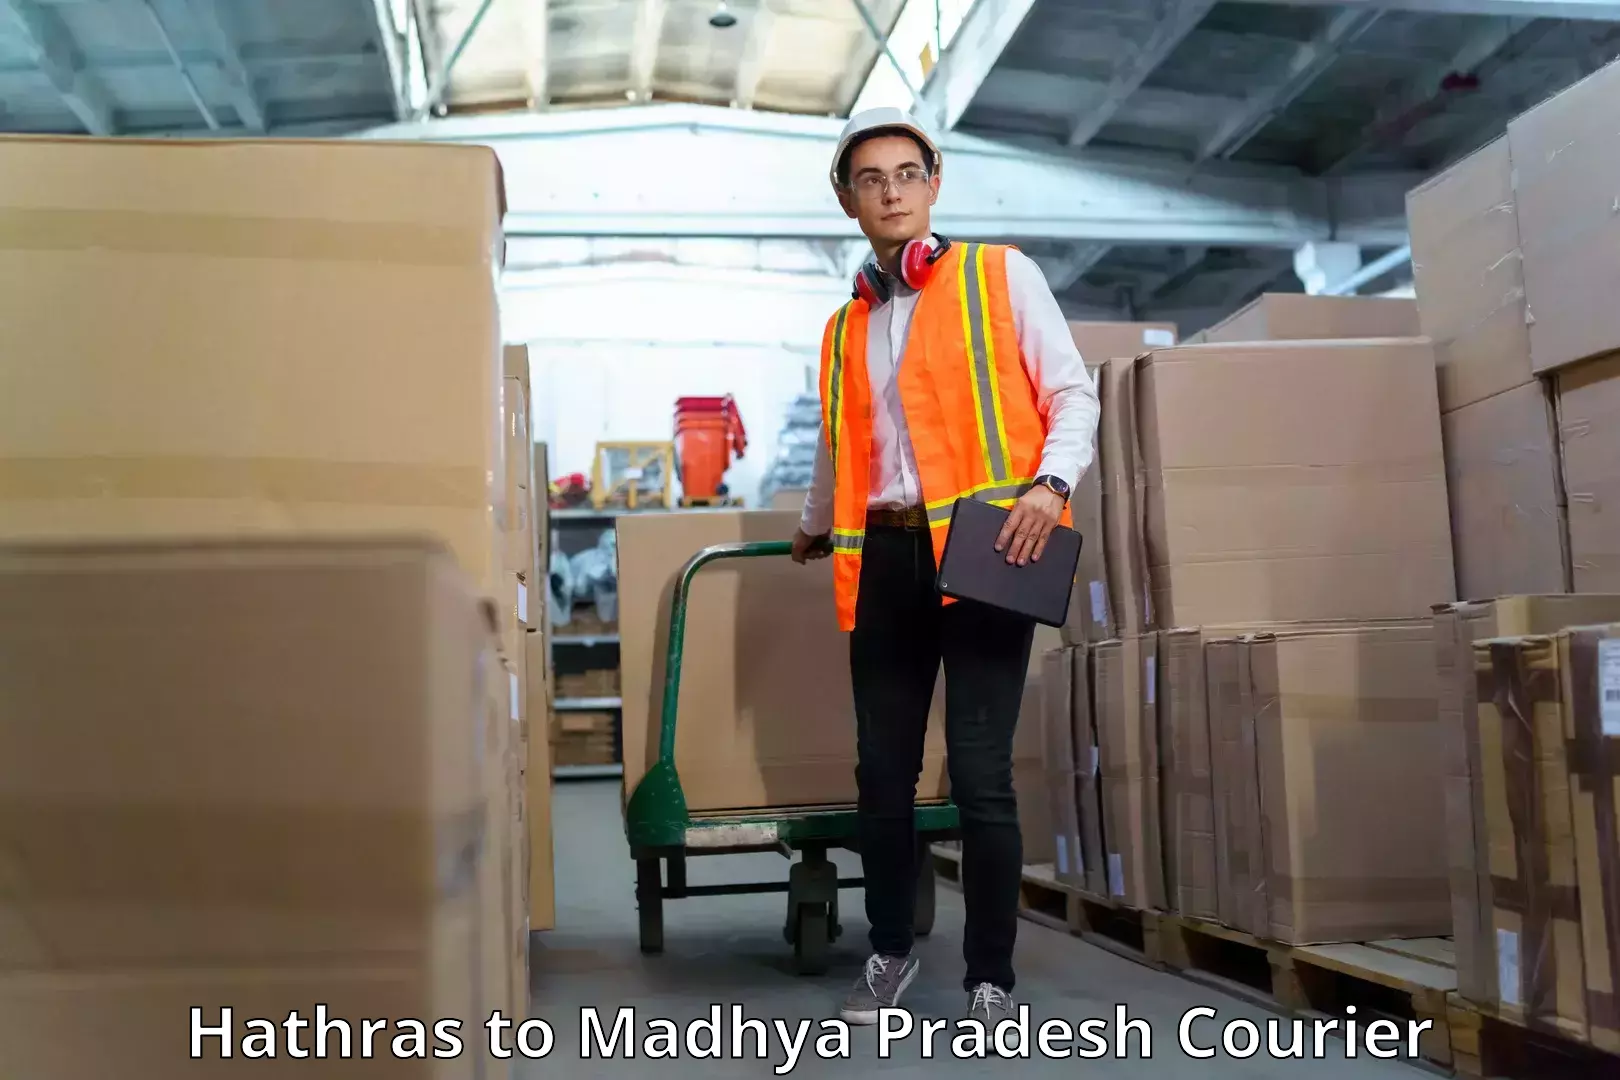 Multi-national courier services Hathras to Bhopal